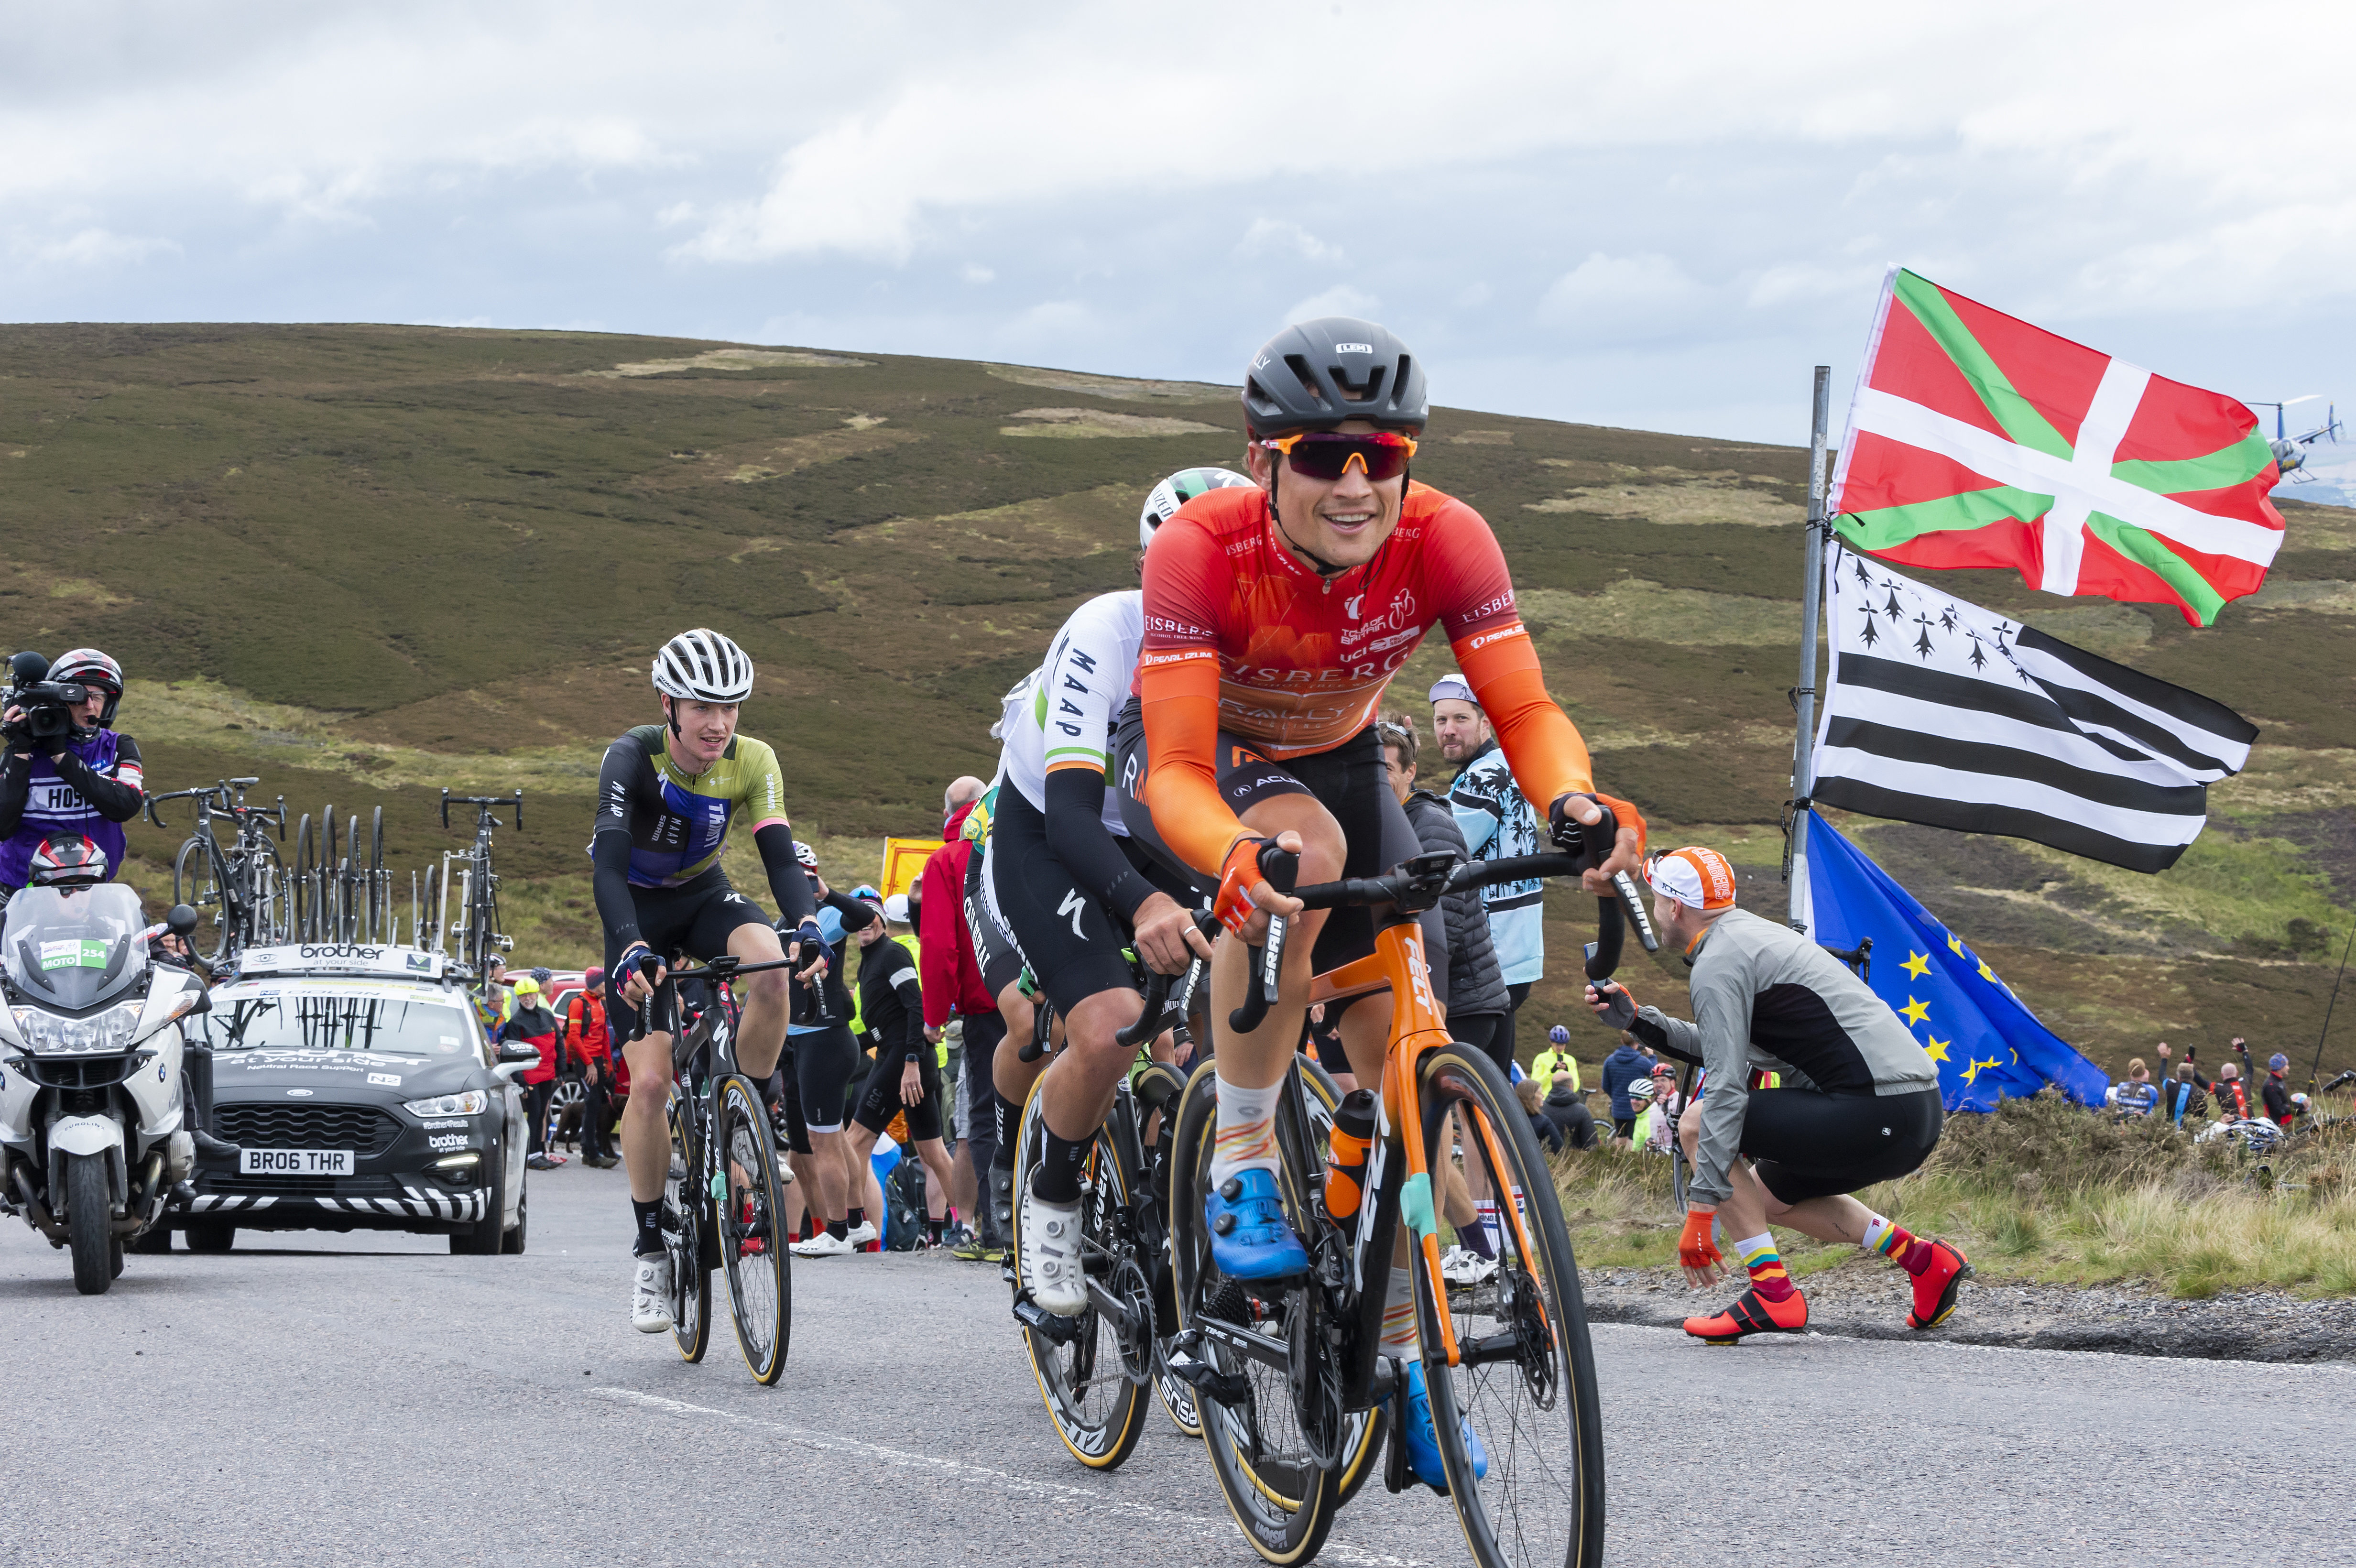 Riders cycling up a hill in Aberdeenshire with support cars and flags in the background.